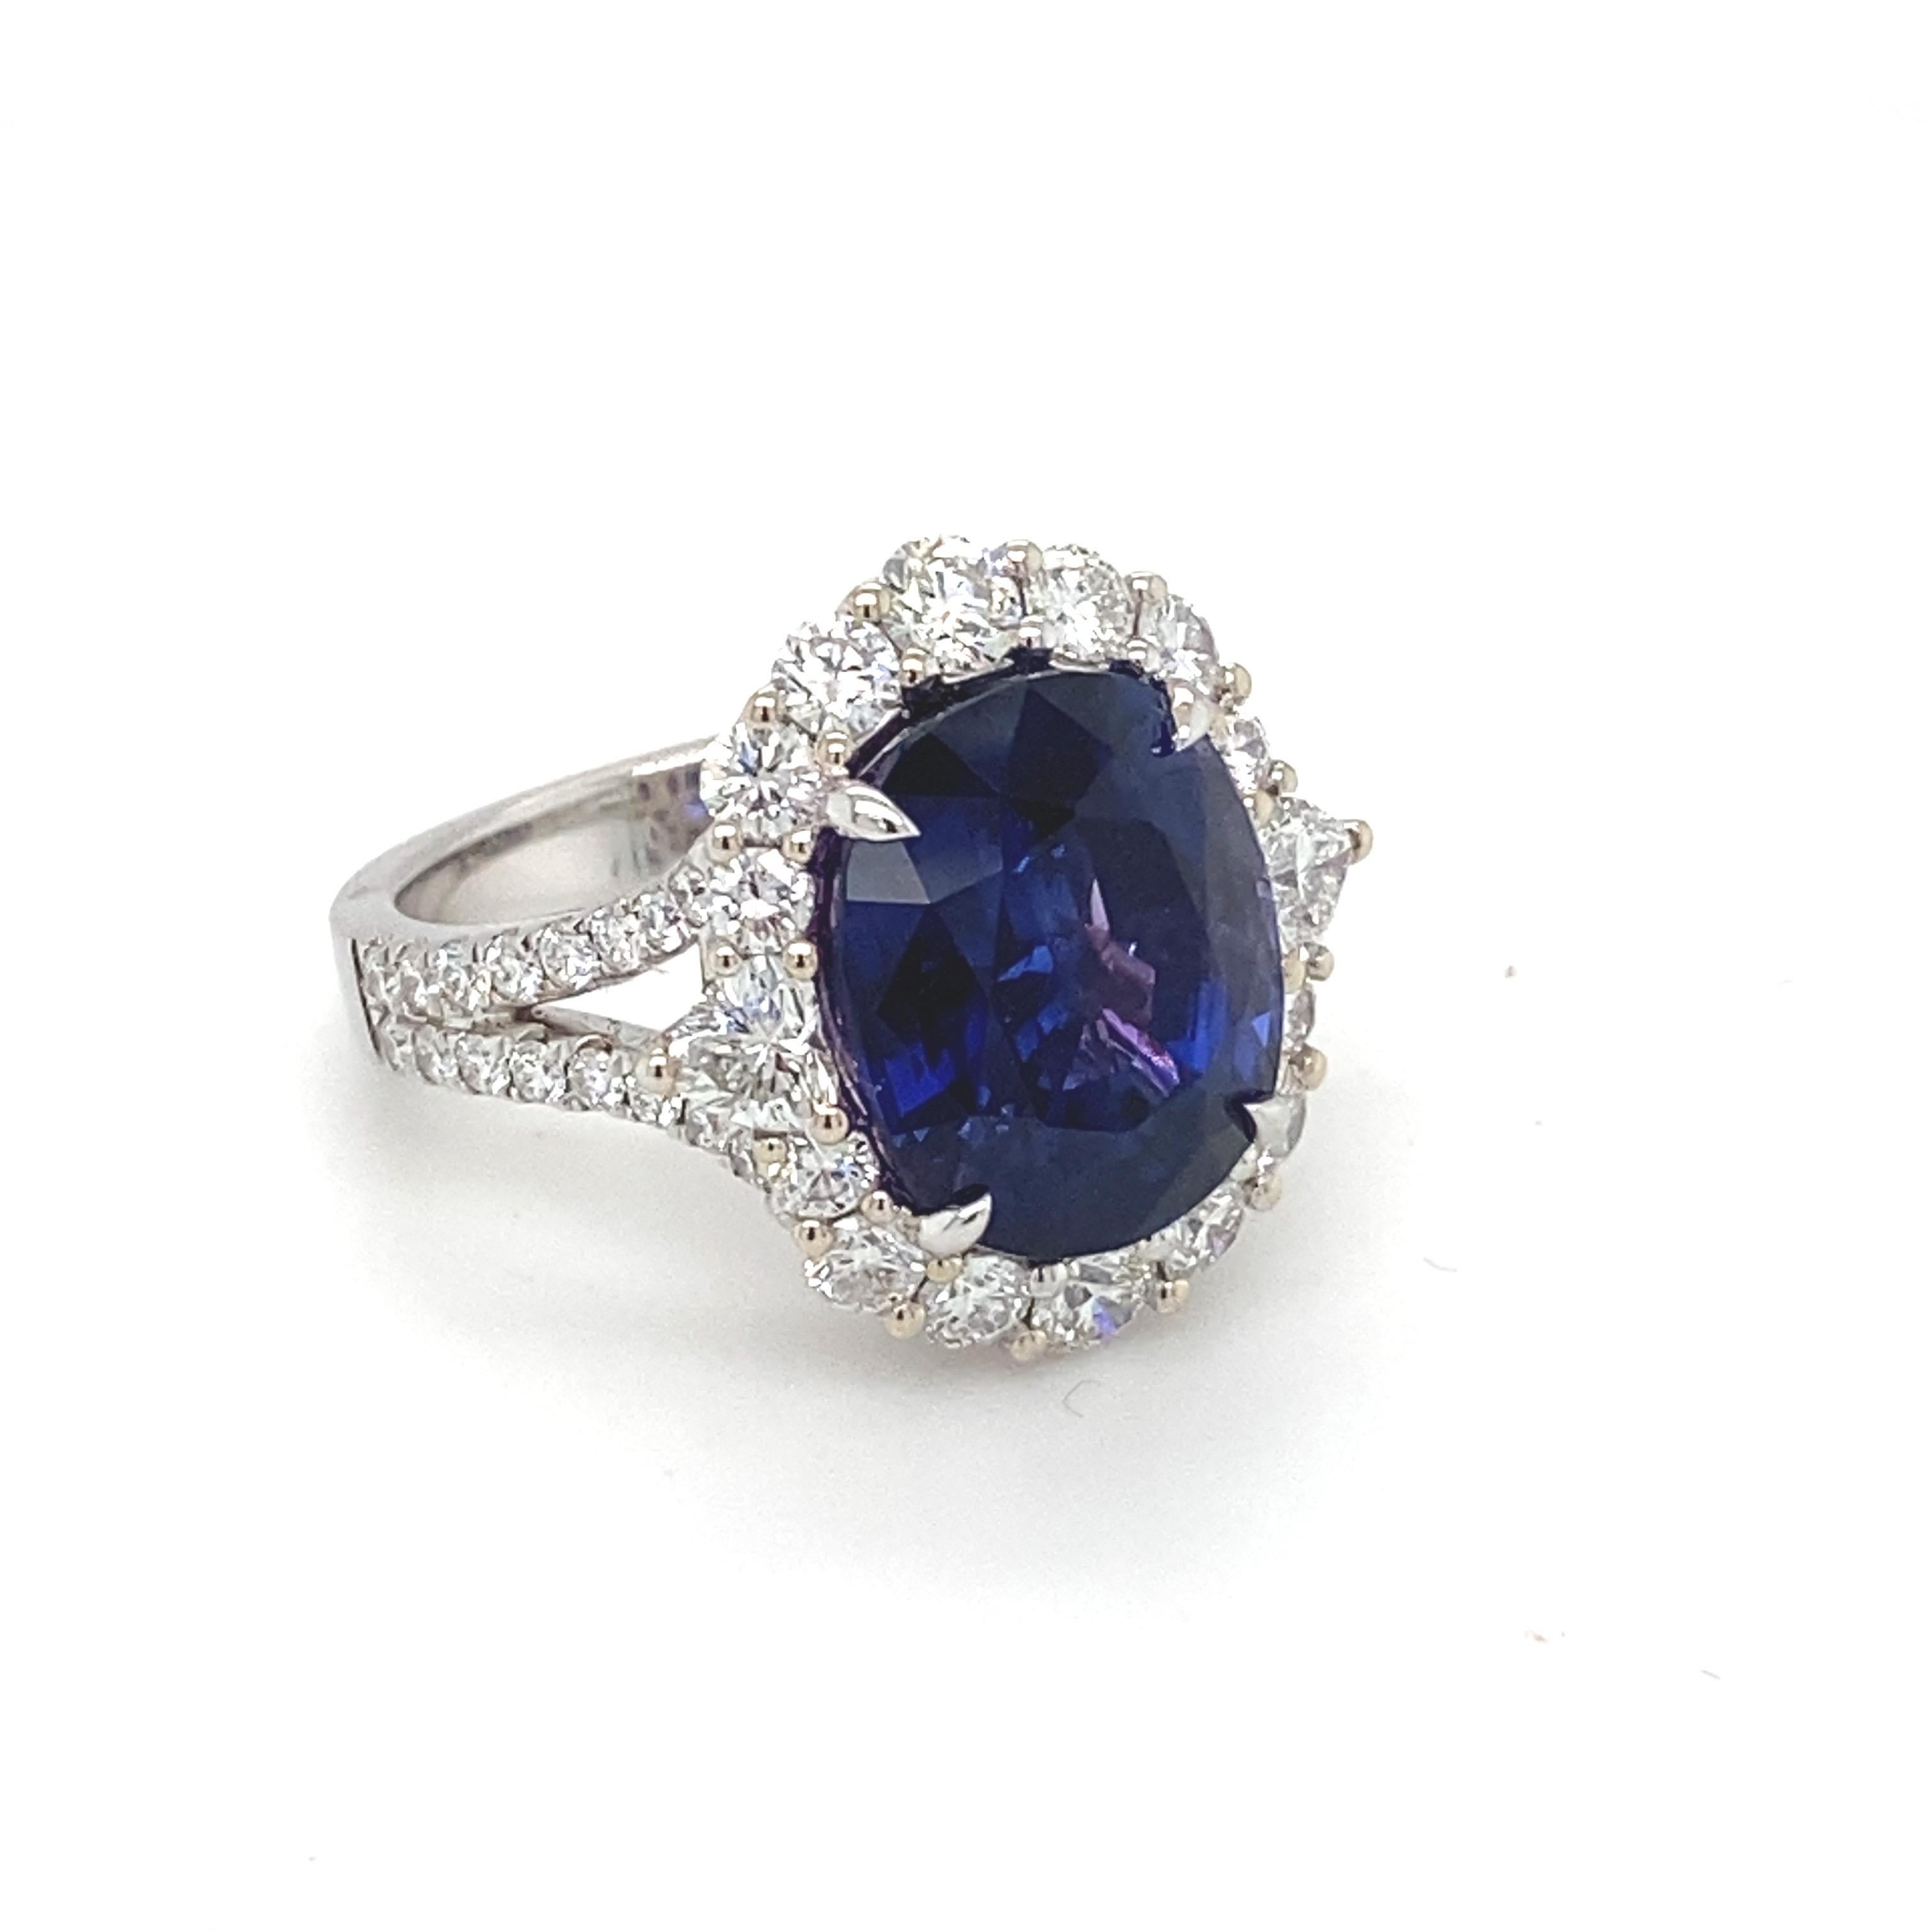 Artisan GIA Certified 10.04 Carat Violet Blue Oval Sapphire Diamond Engagement Ring  For Sale